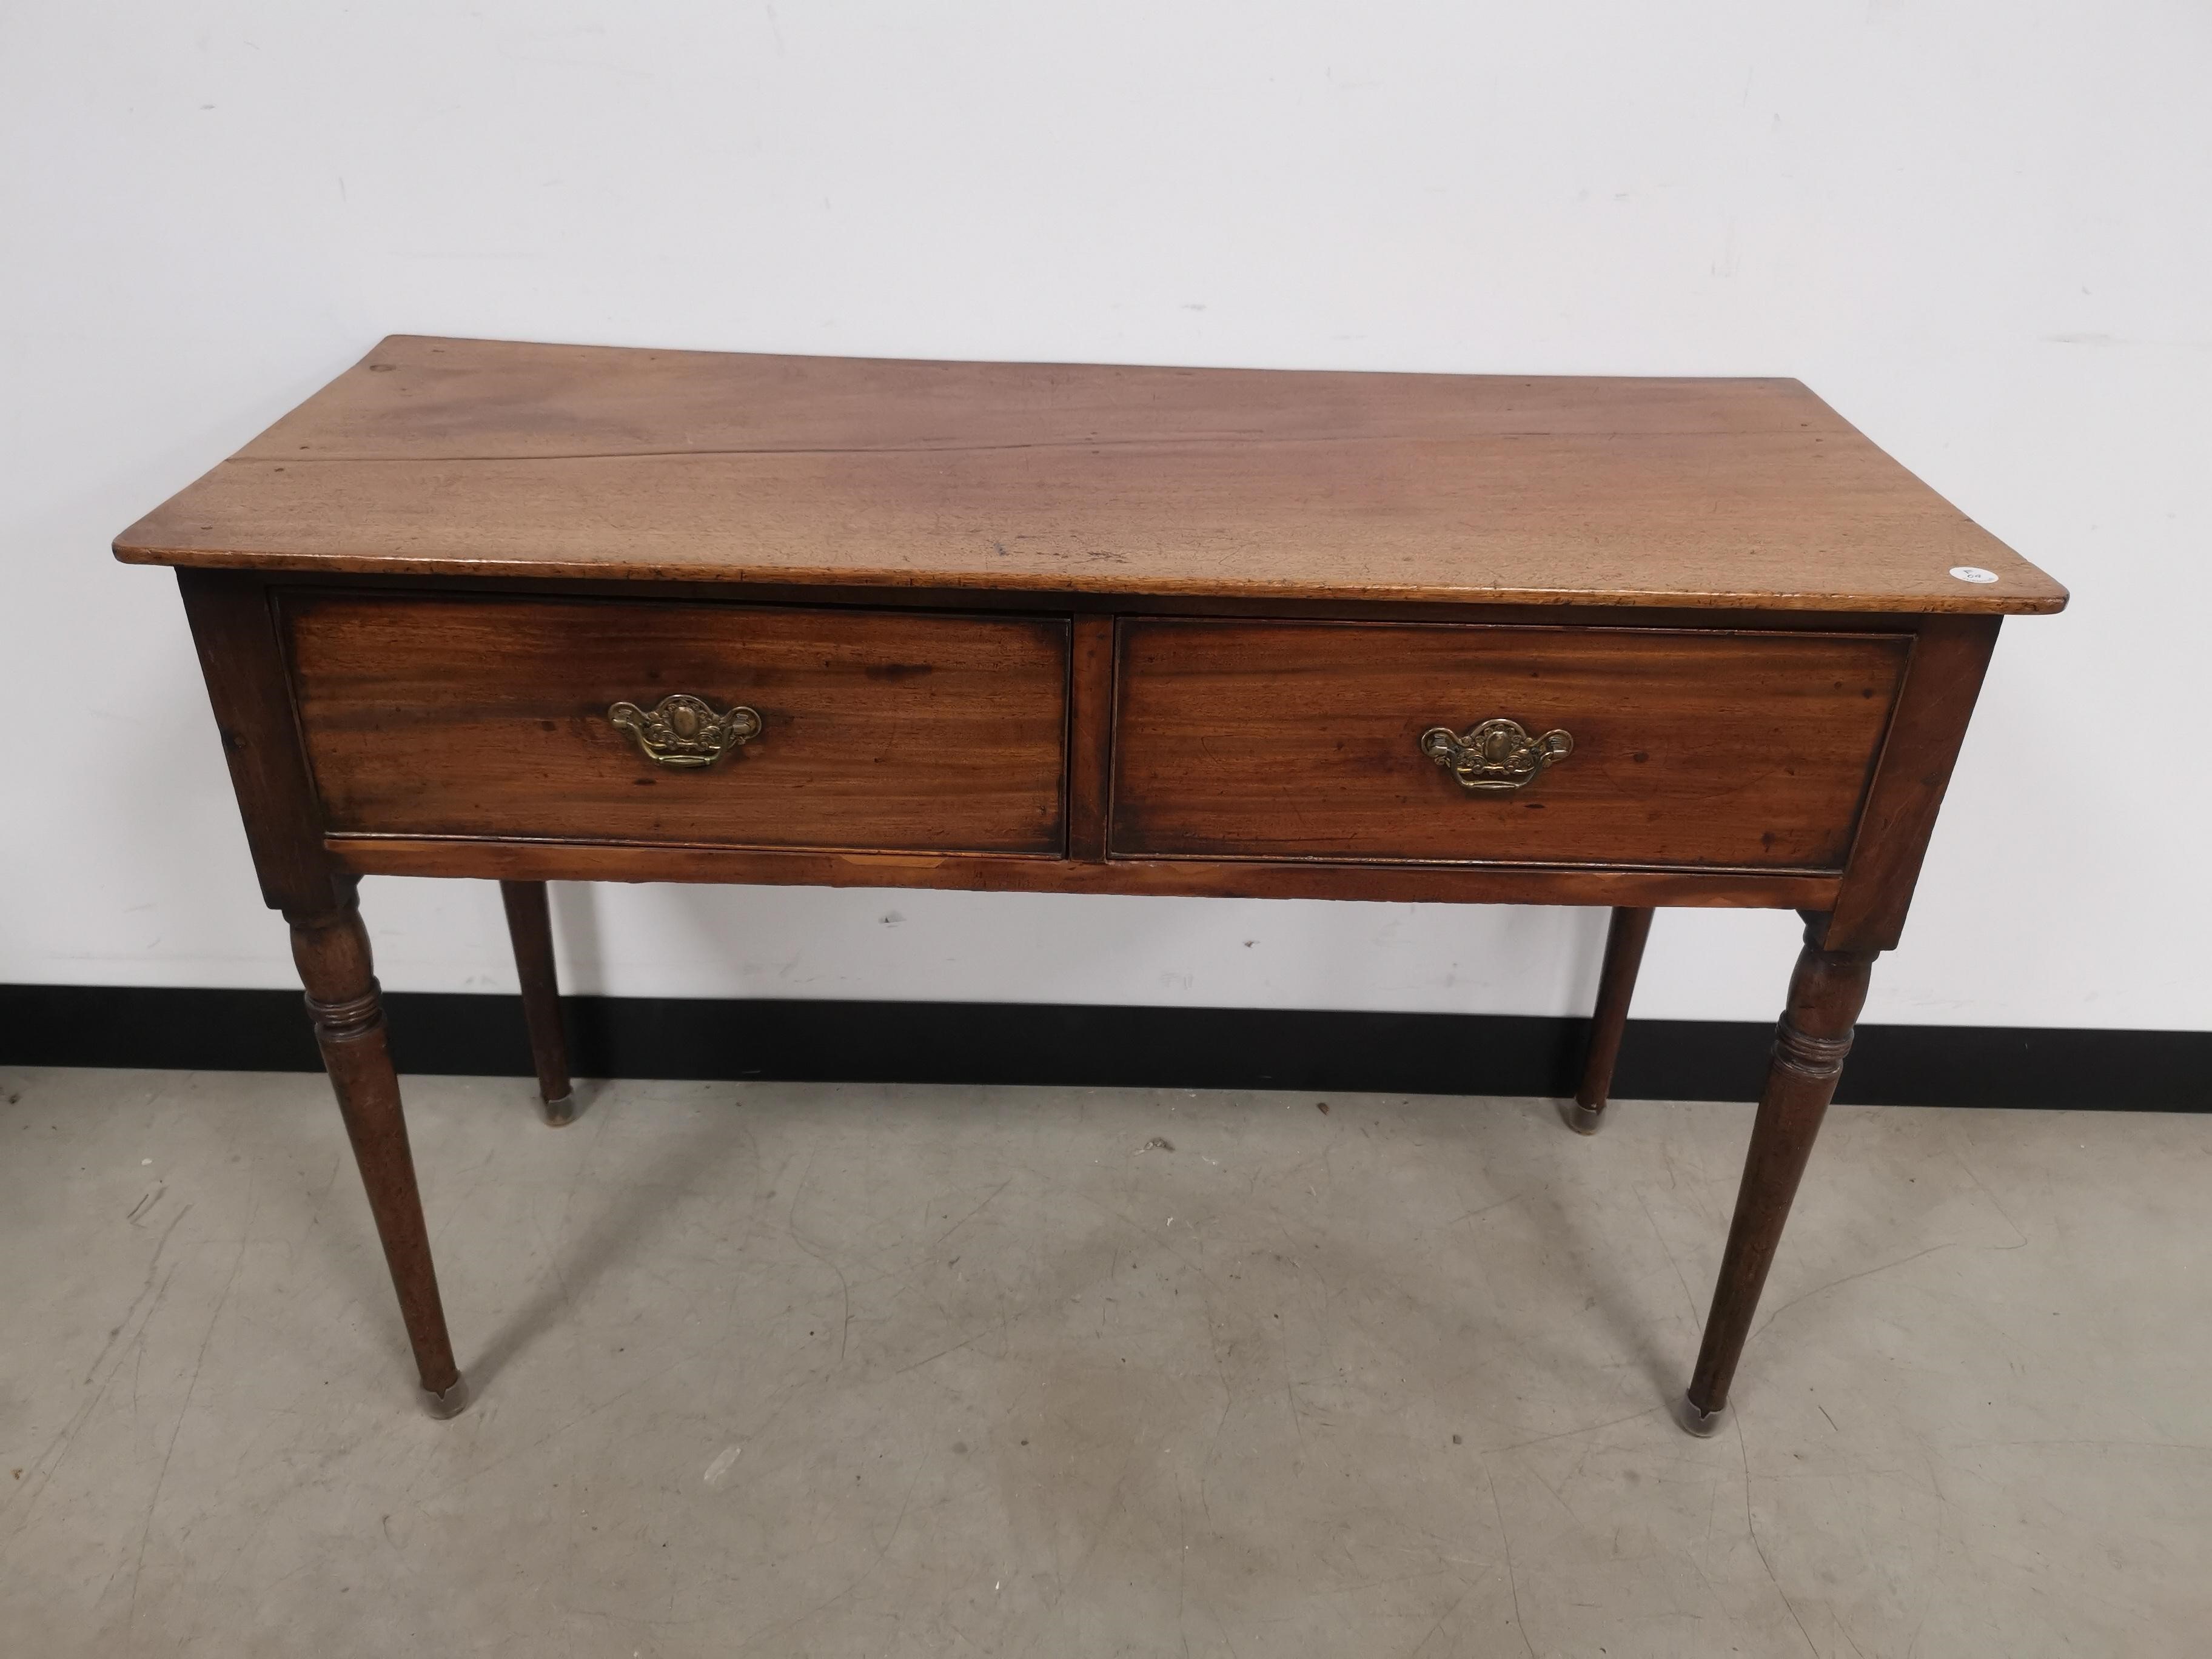 19th Century side table, with two drawers.